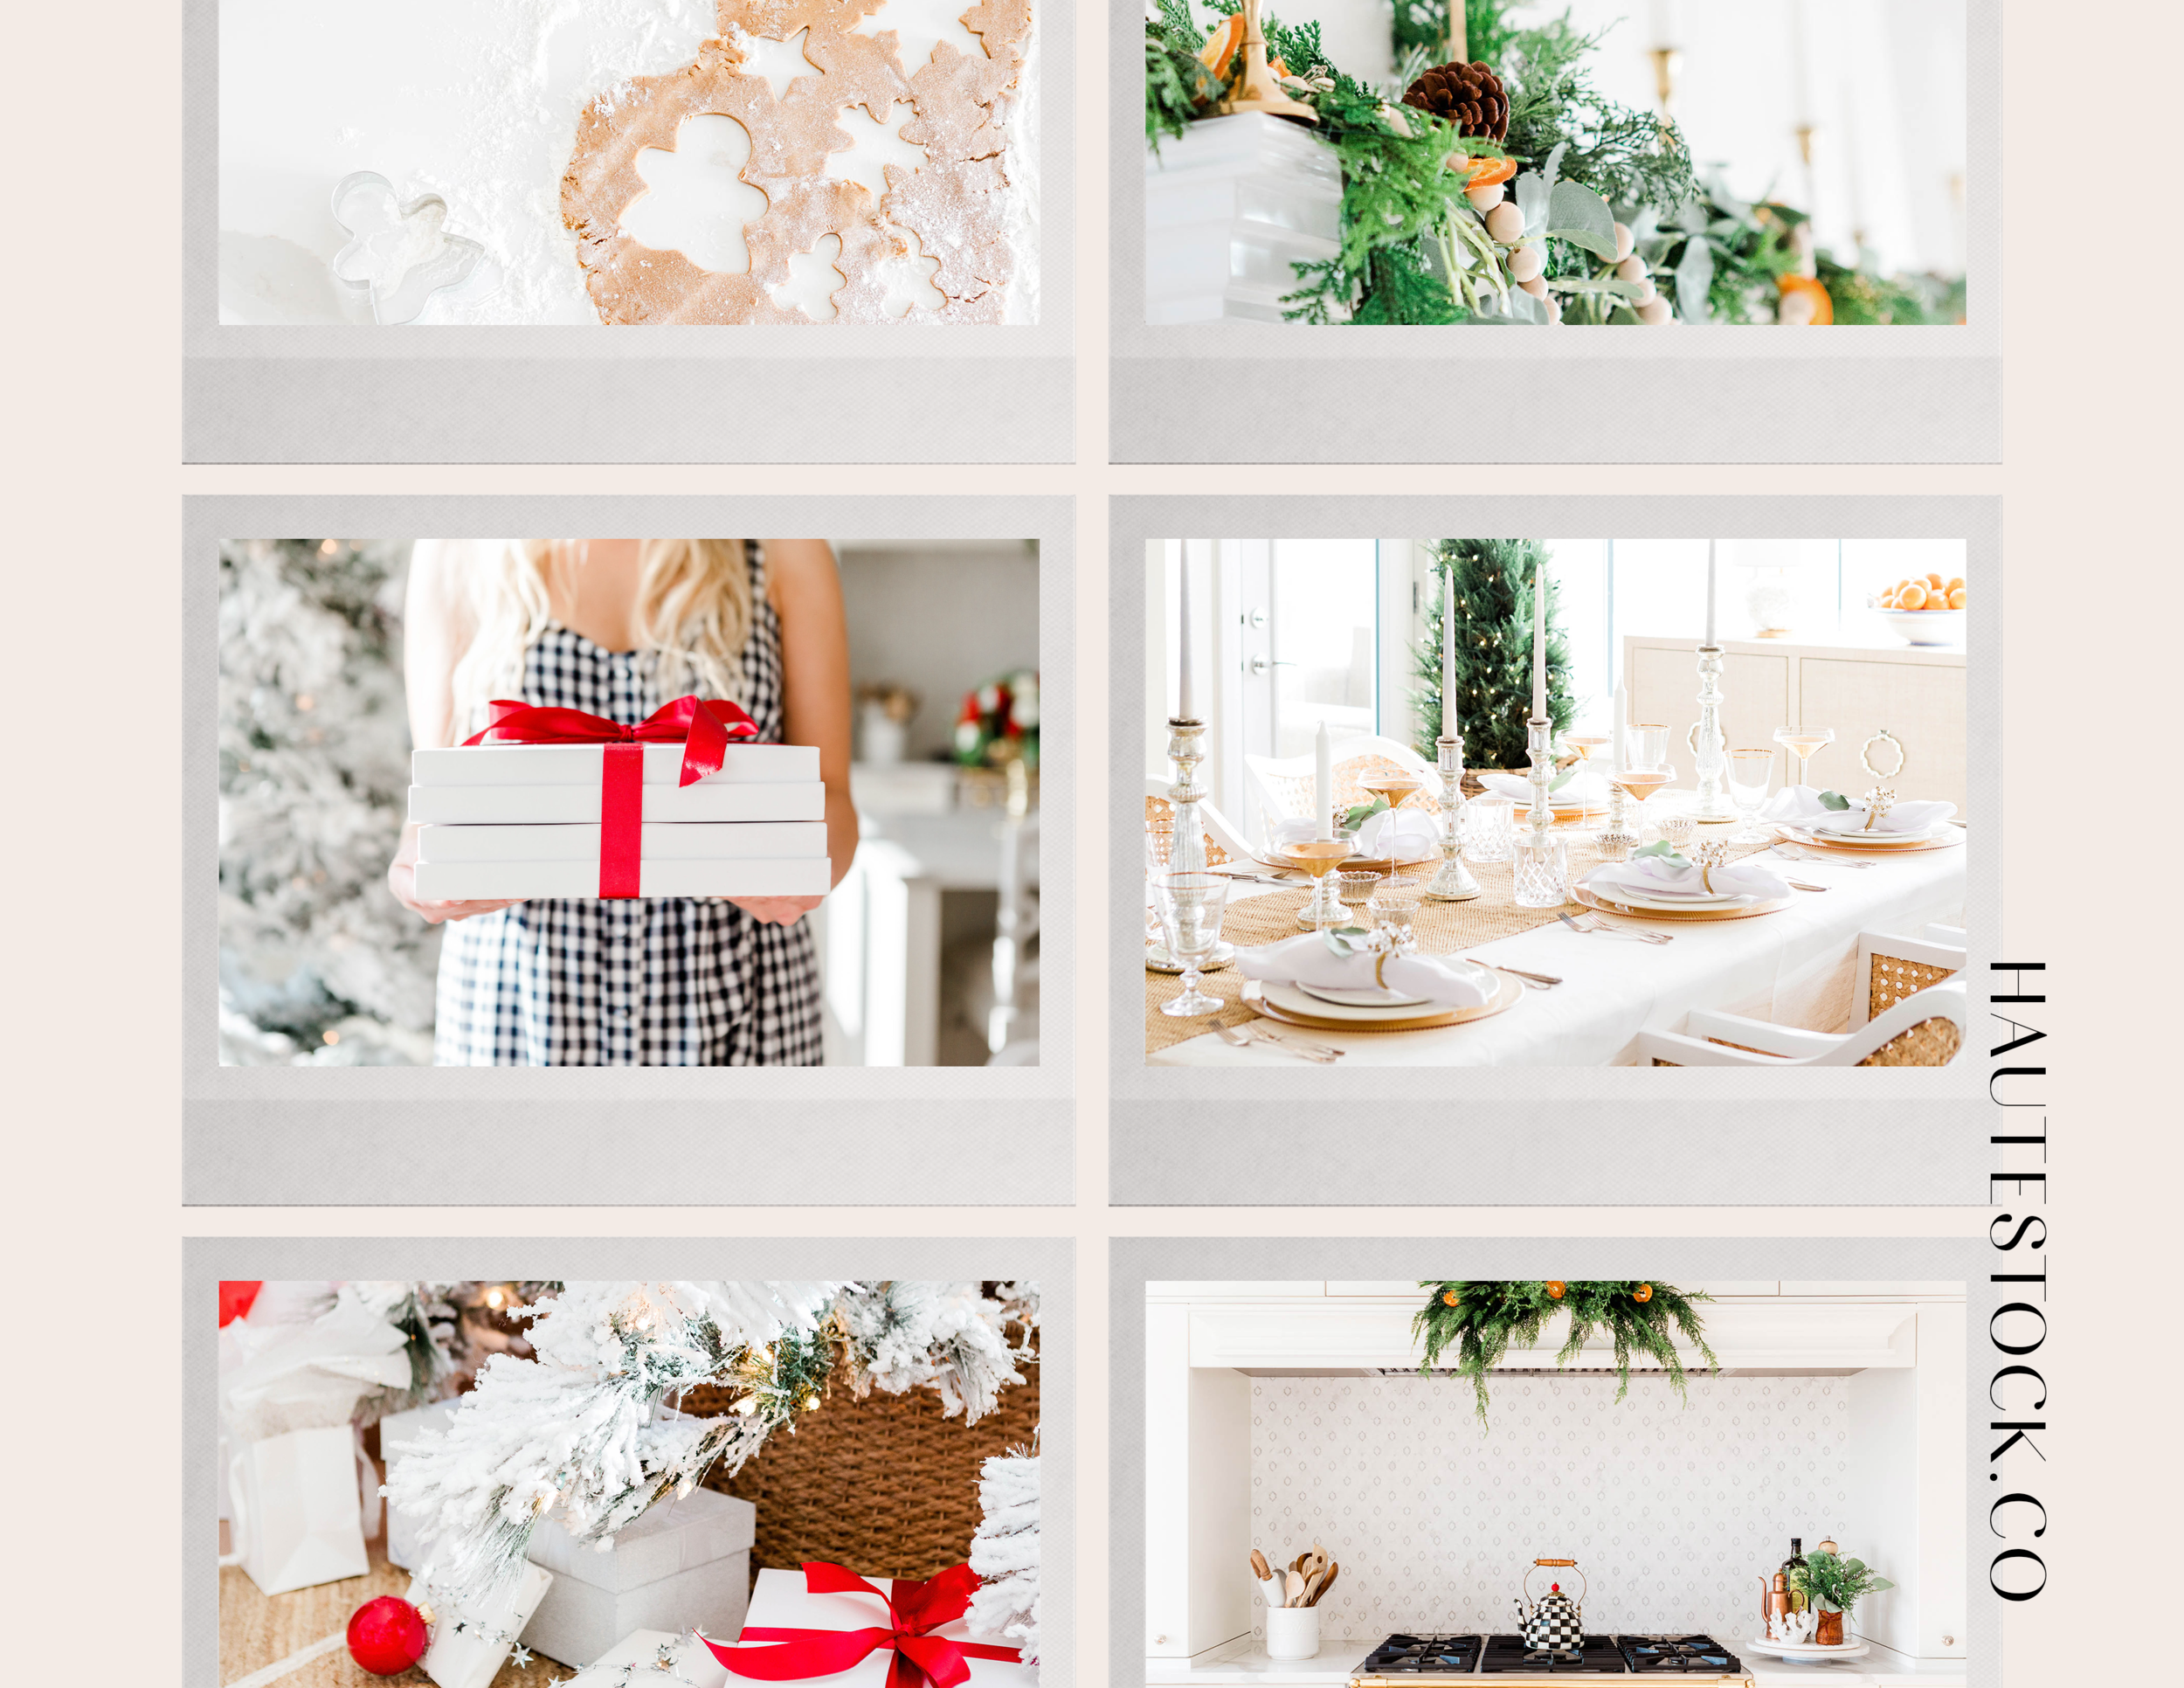 Holiday decorating & lifestyle images for female entrepreneurs from Haute Stock featuring a stylish yet cozy vibe.